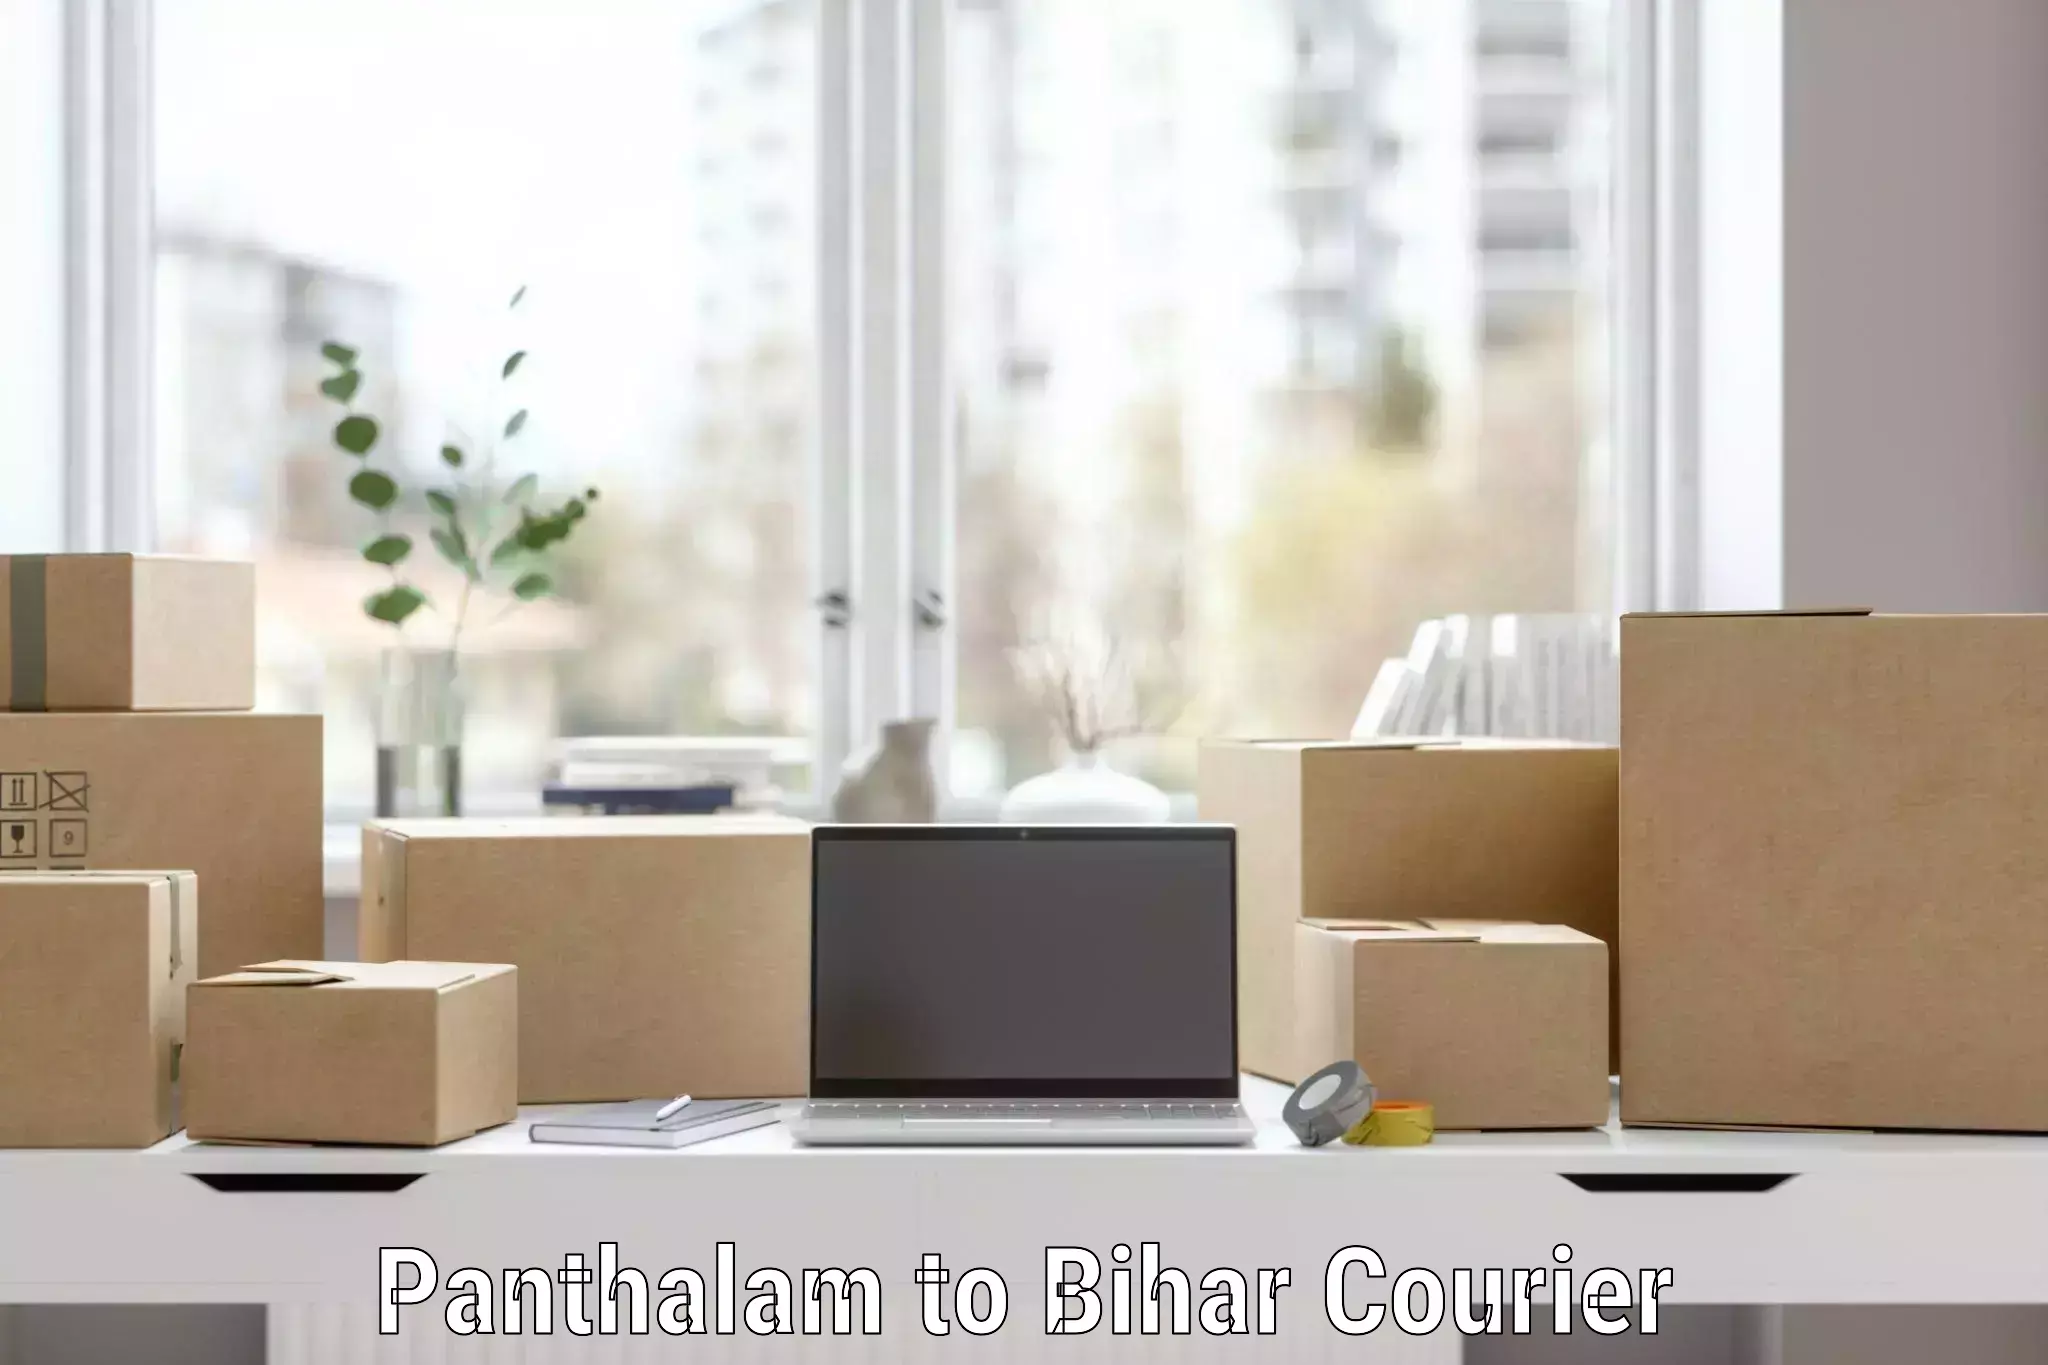 Trusted relocation services Panthalam to Bagaha